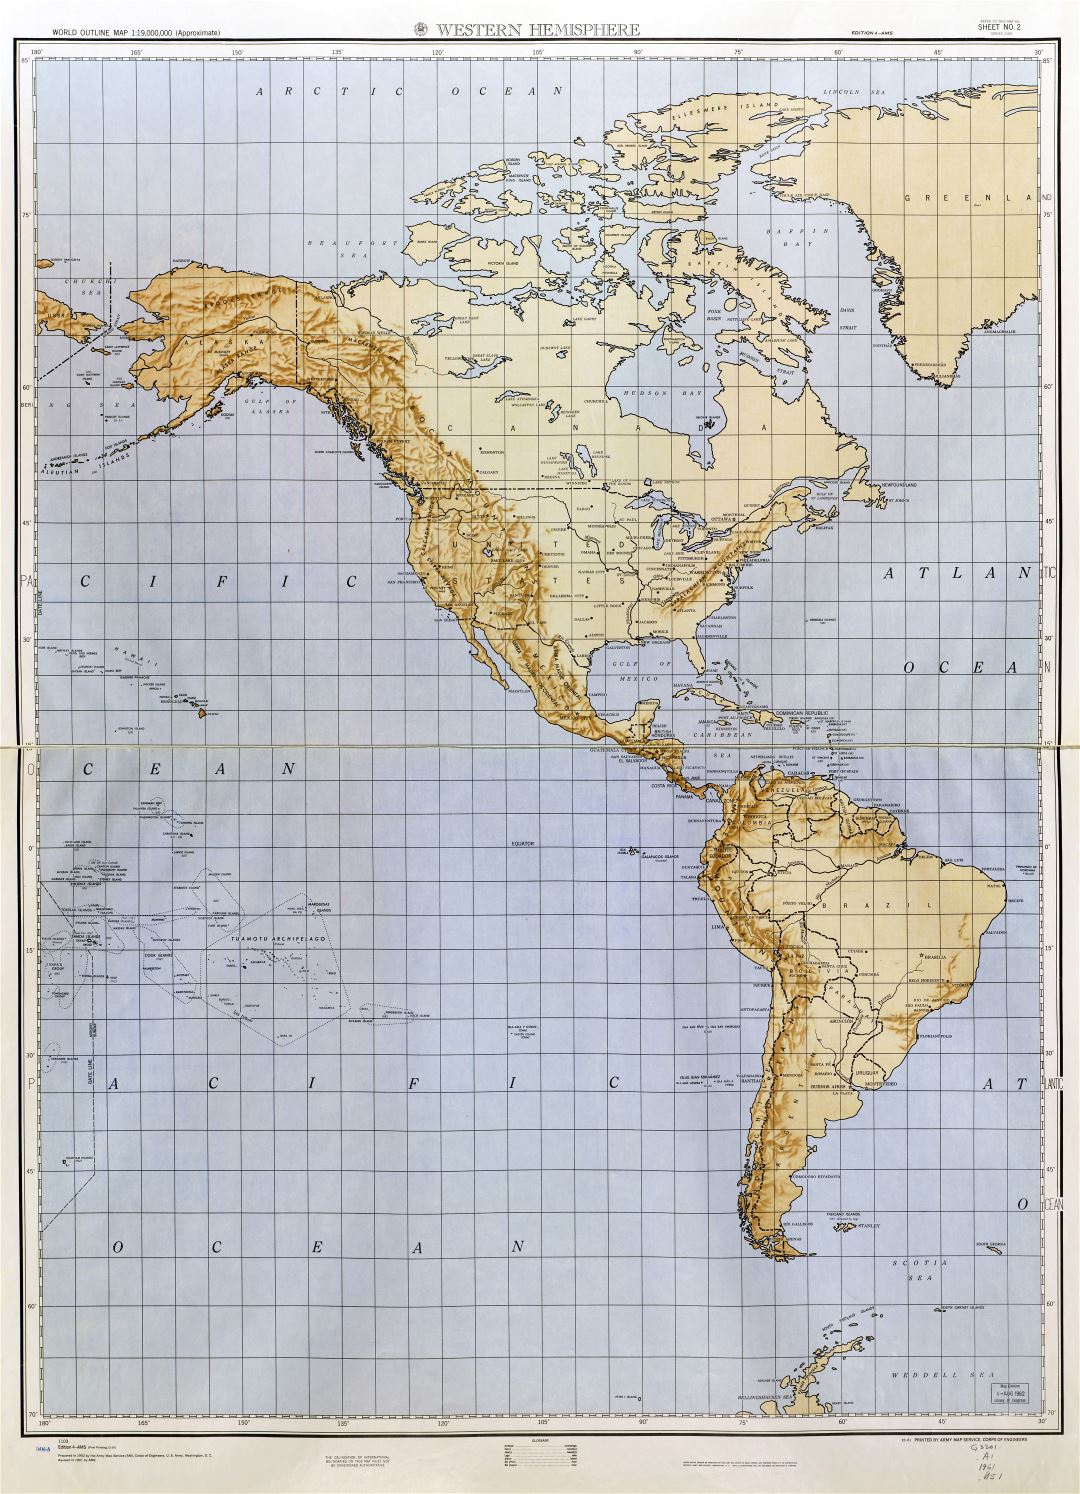 Large detailed World outline map with relief - part 1 (Western Hemisphere) 1961-62